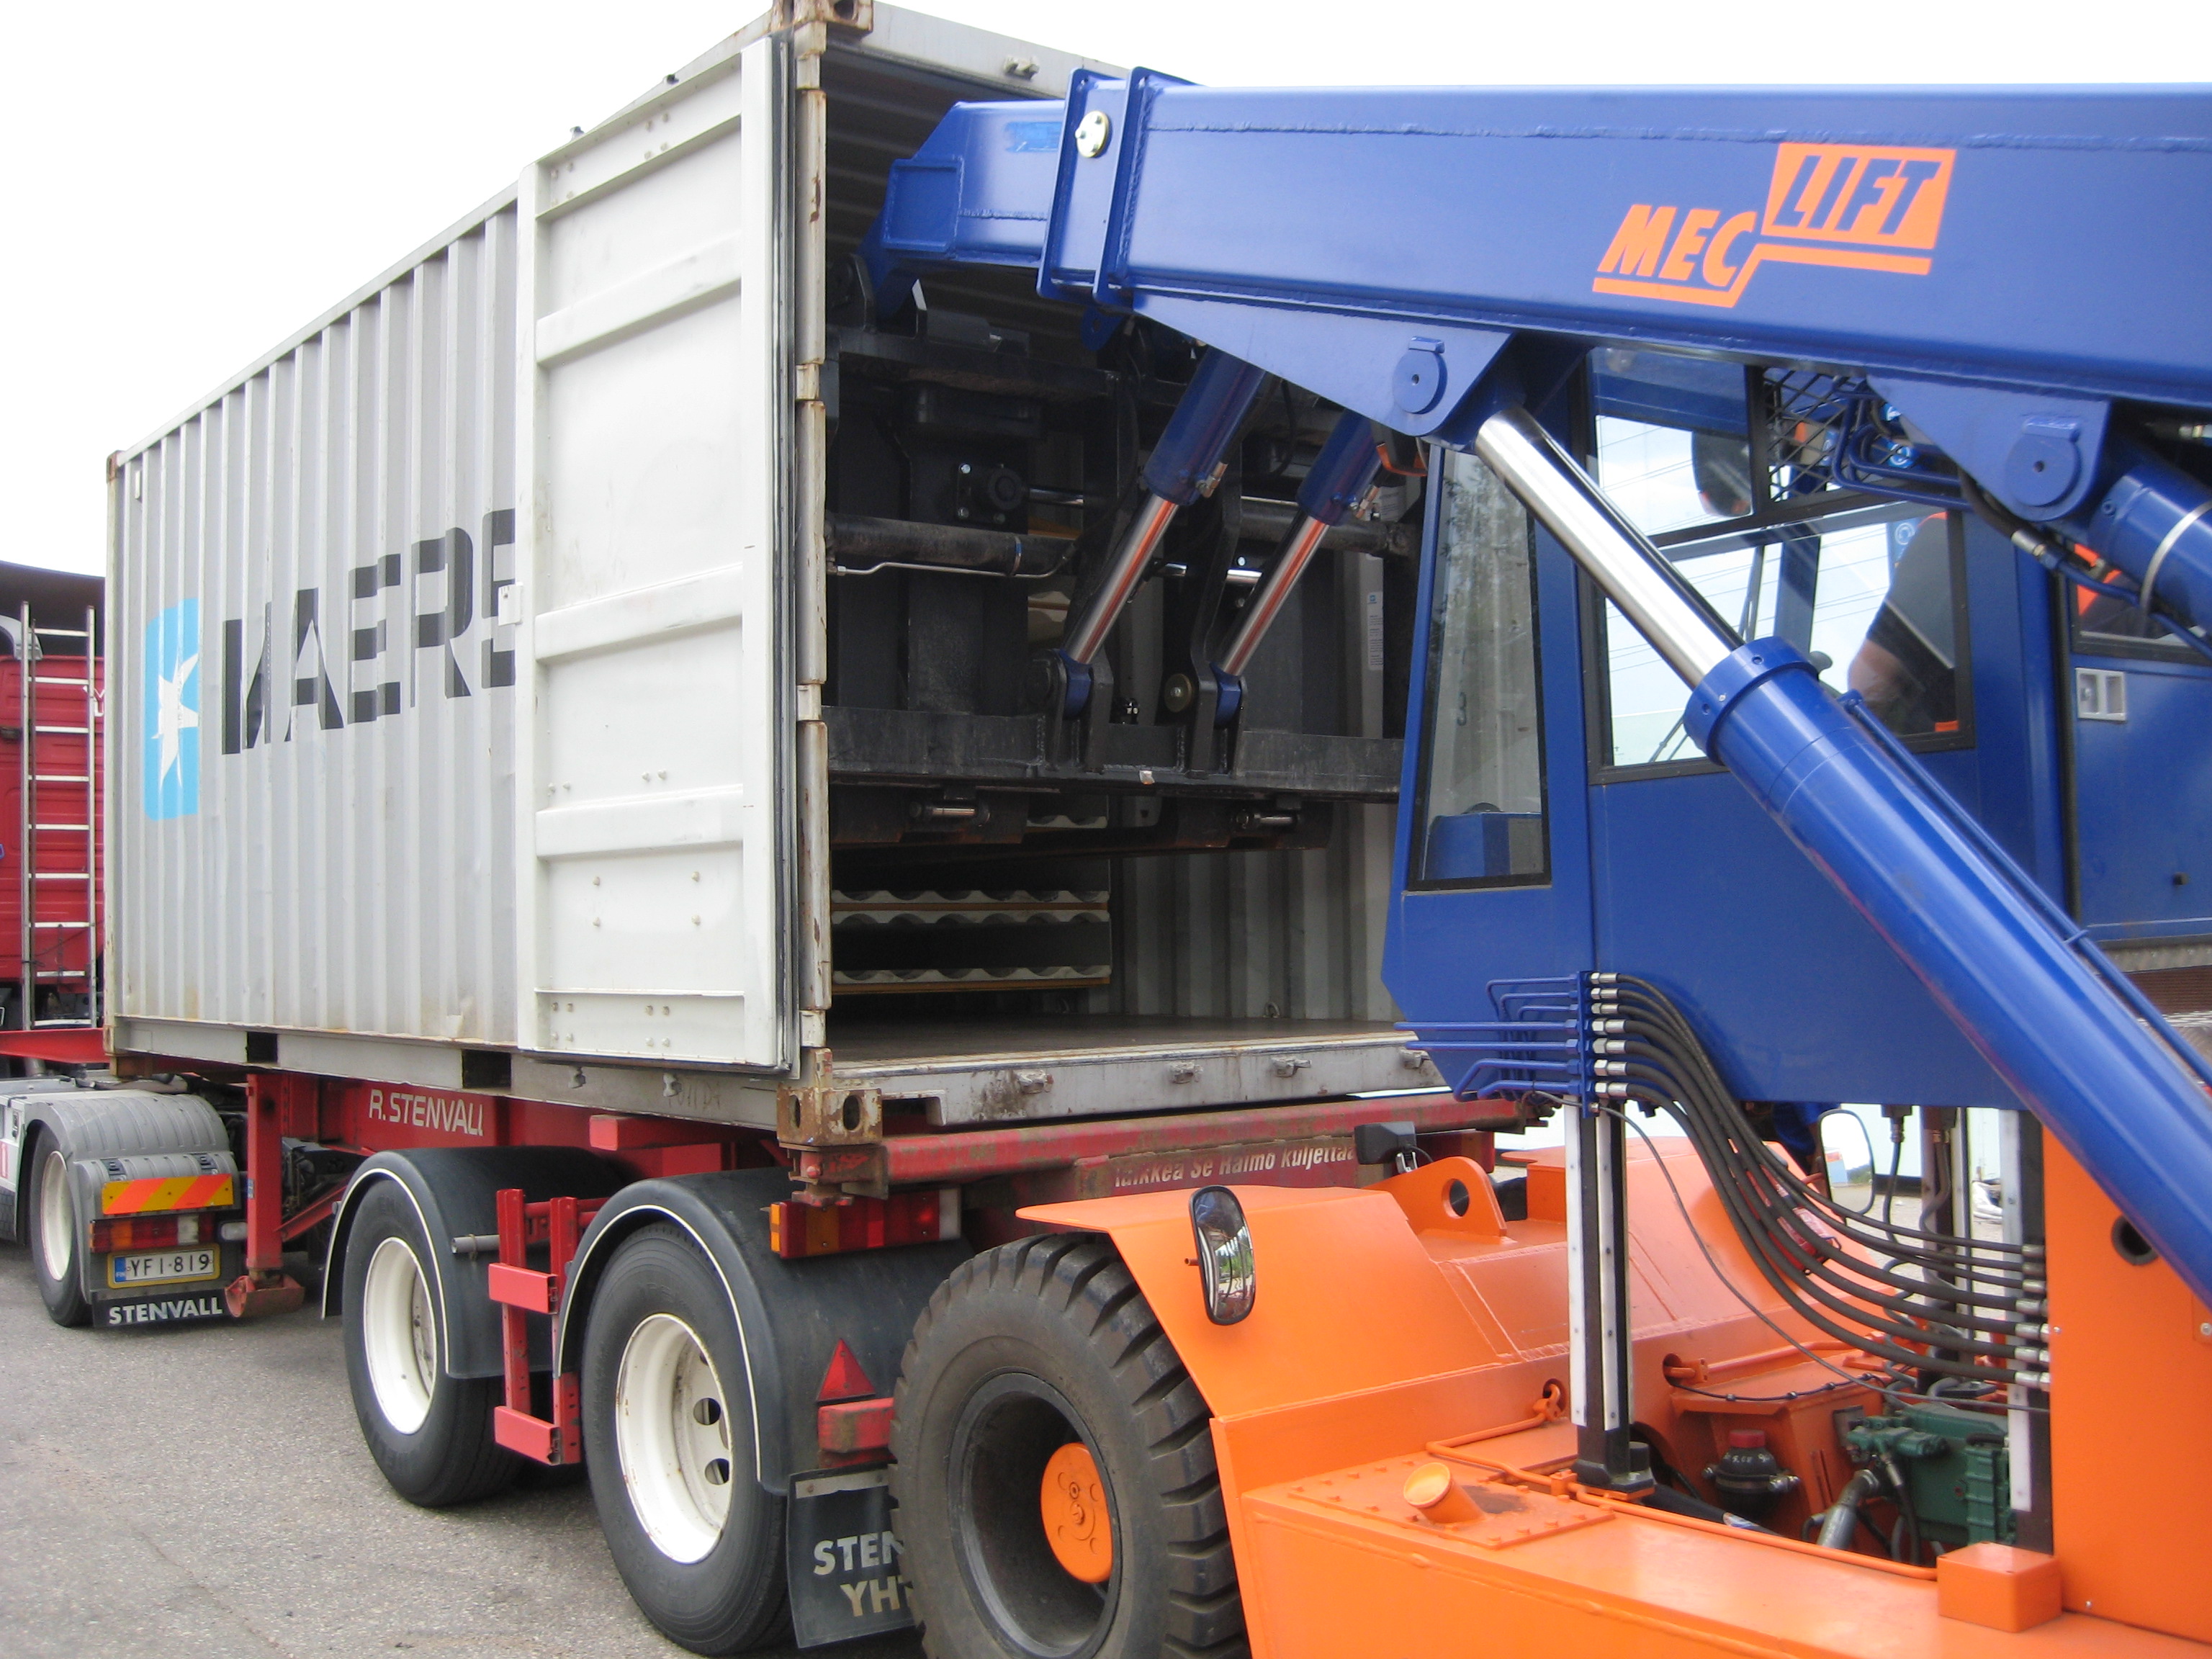 ML1612R is loading a container on the trailer